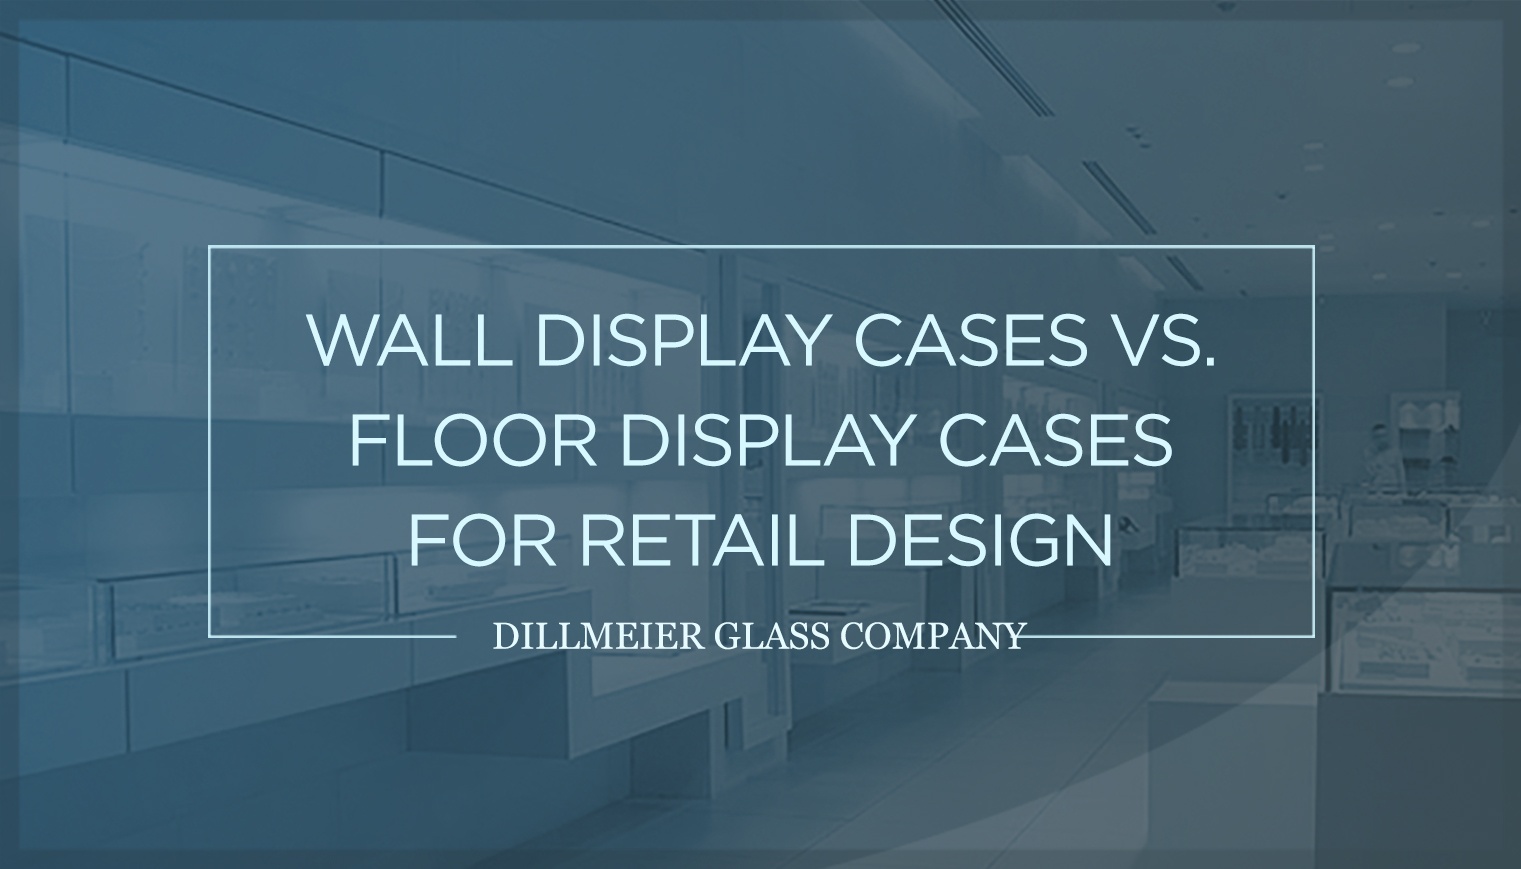 Wall Display Cases vs. Floor Display Cases for Retail Design